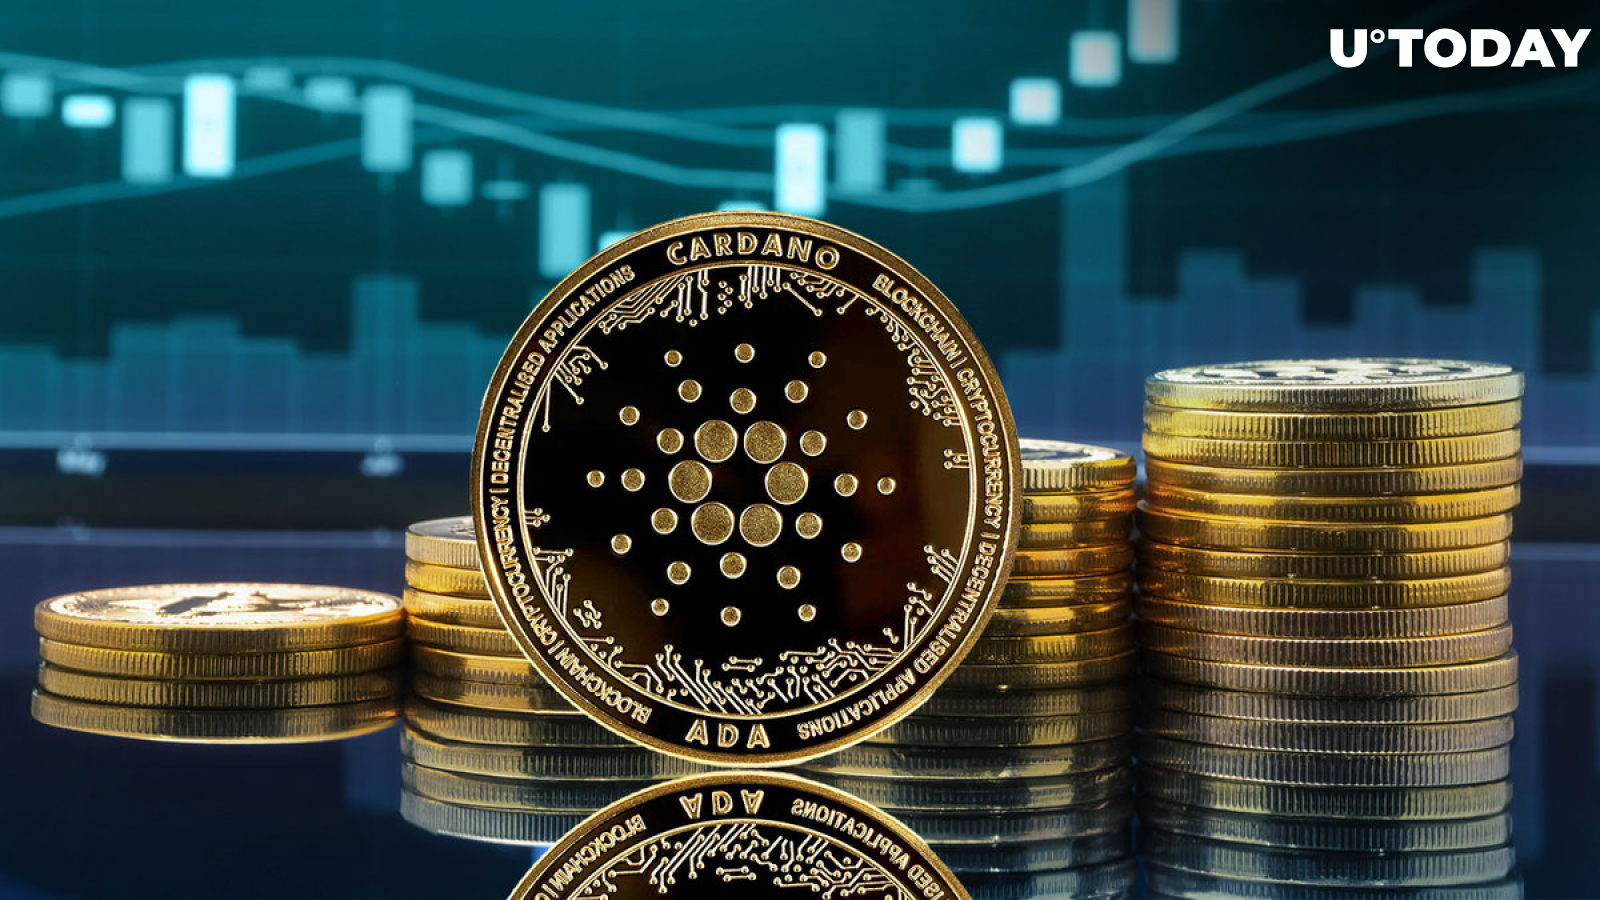 Cardano (ADA) Price Skyrockets 39% for Best December Performance in Seven Years